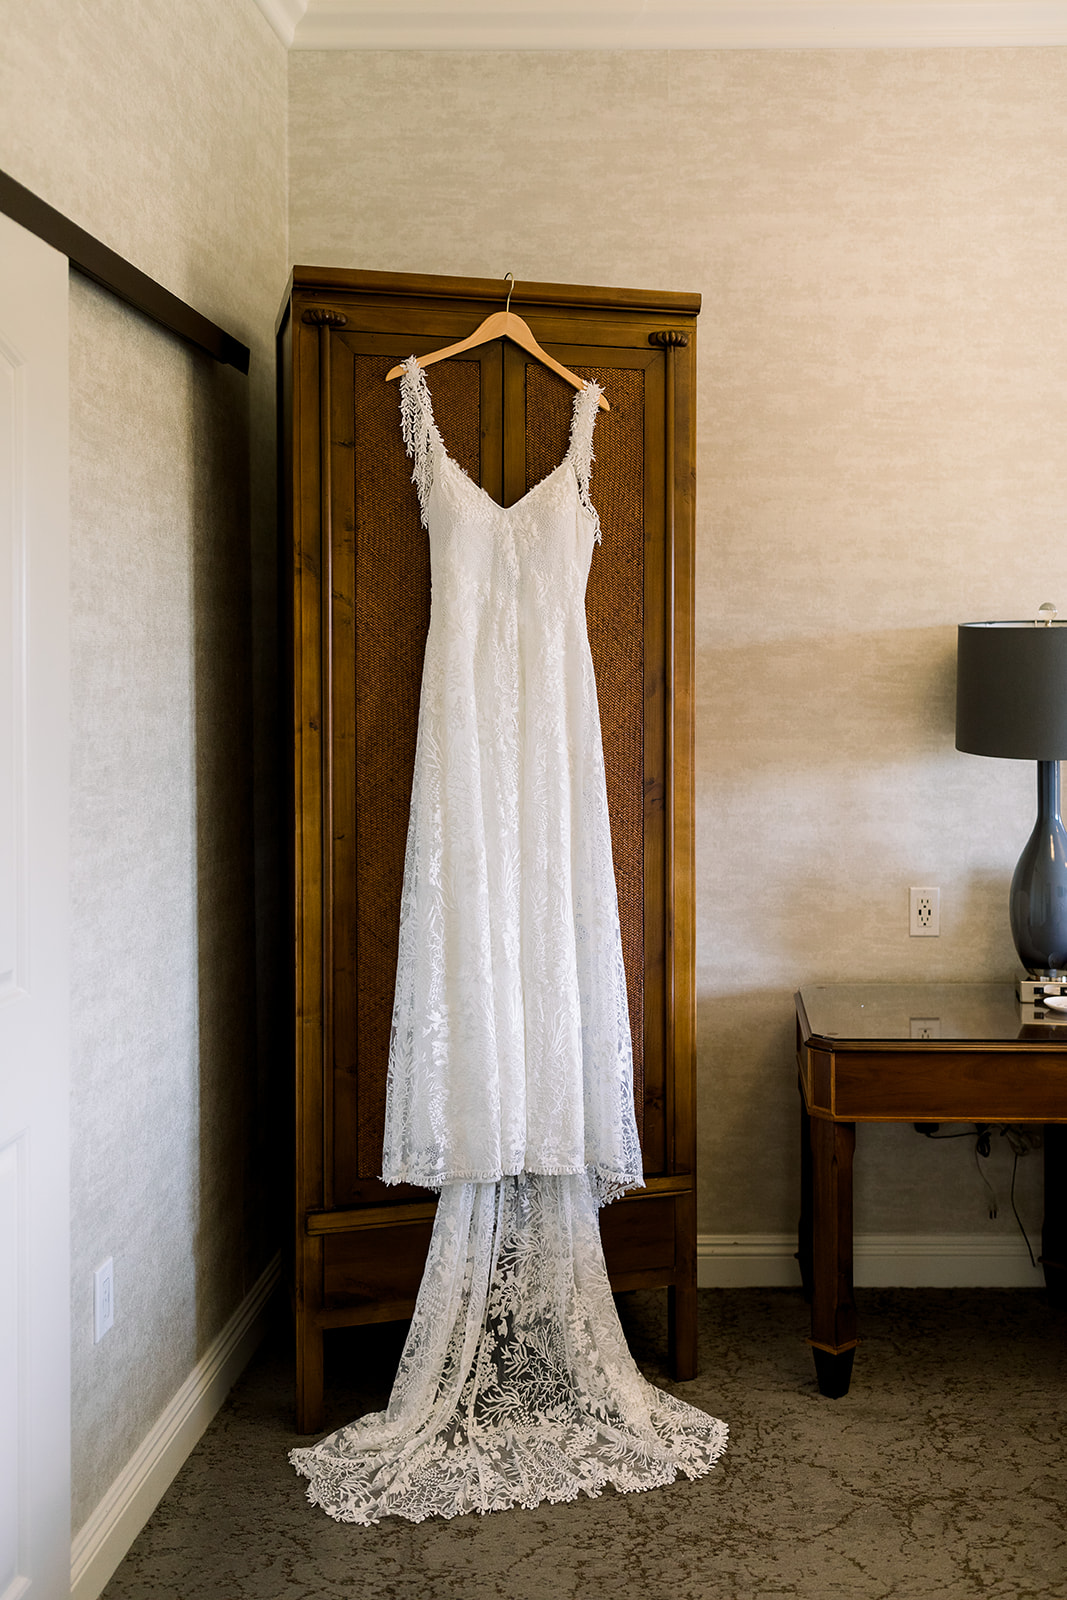 Indulge in the elegance and charm of Allegretto weddings through our curated photo collection.